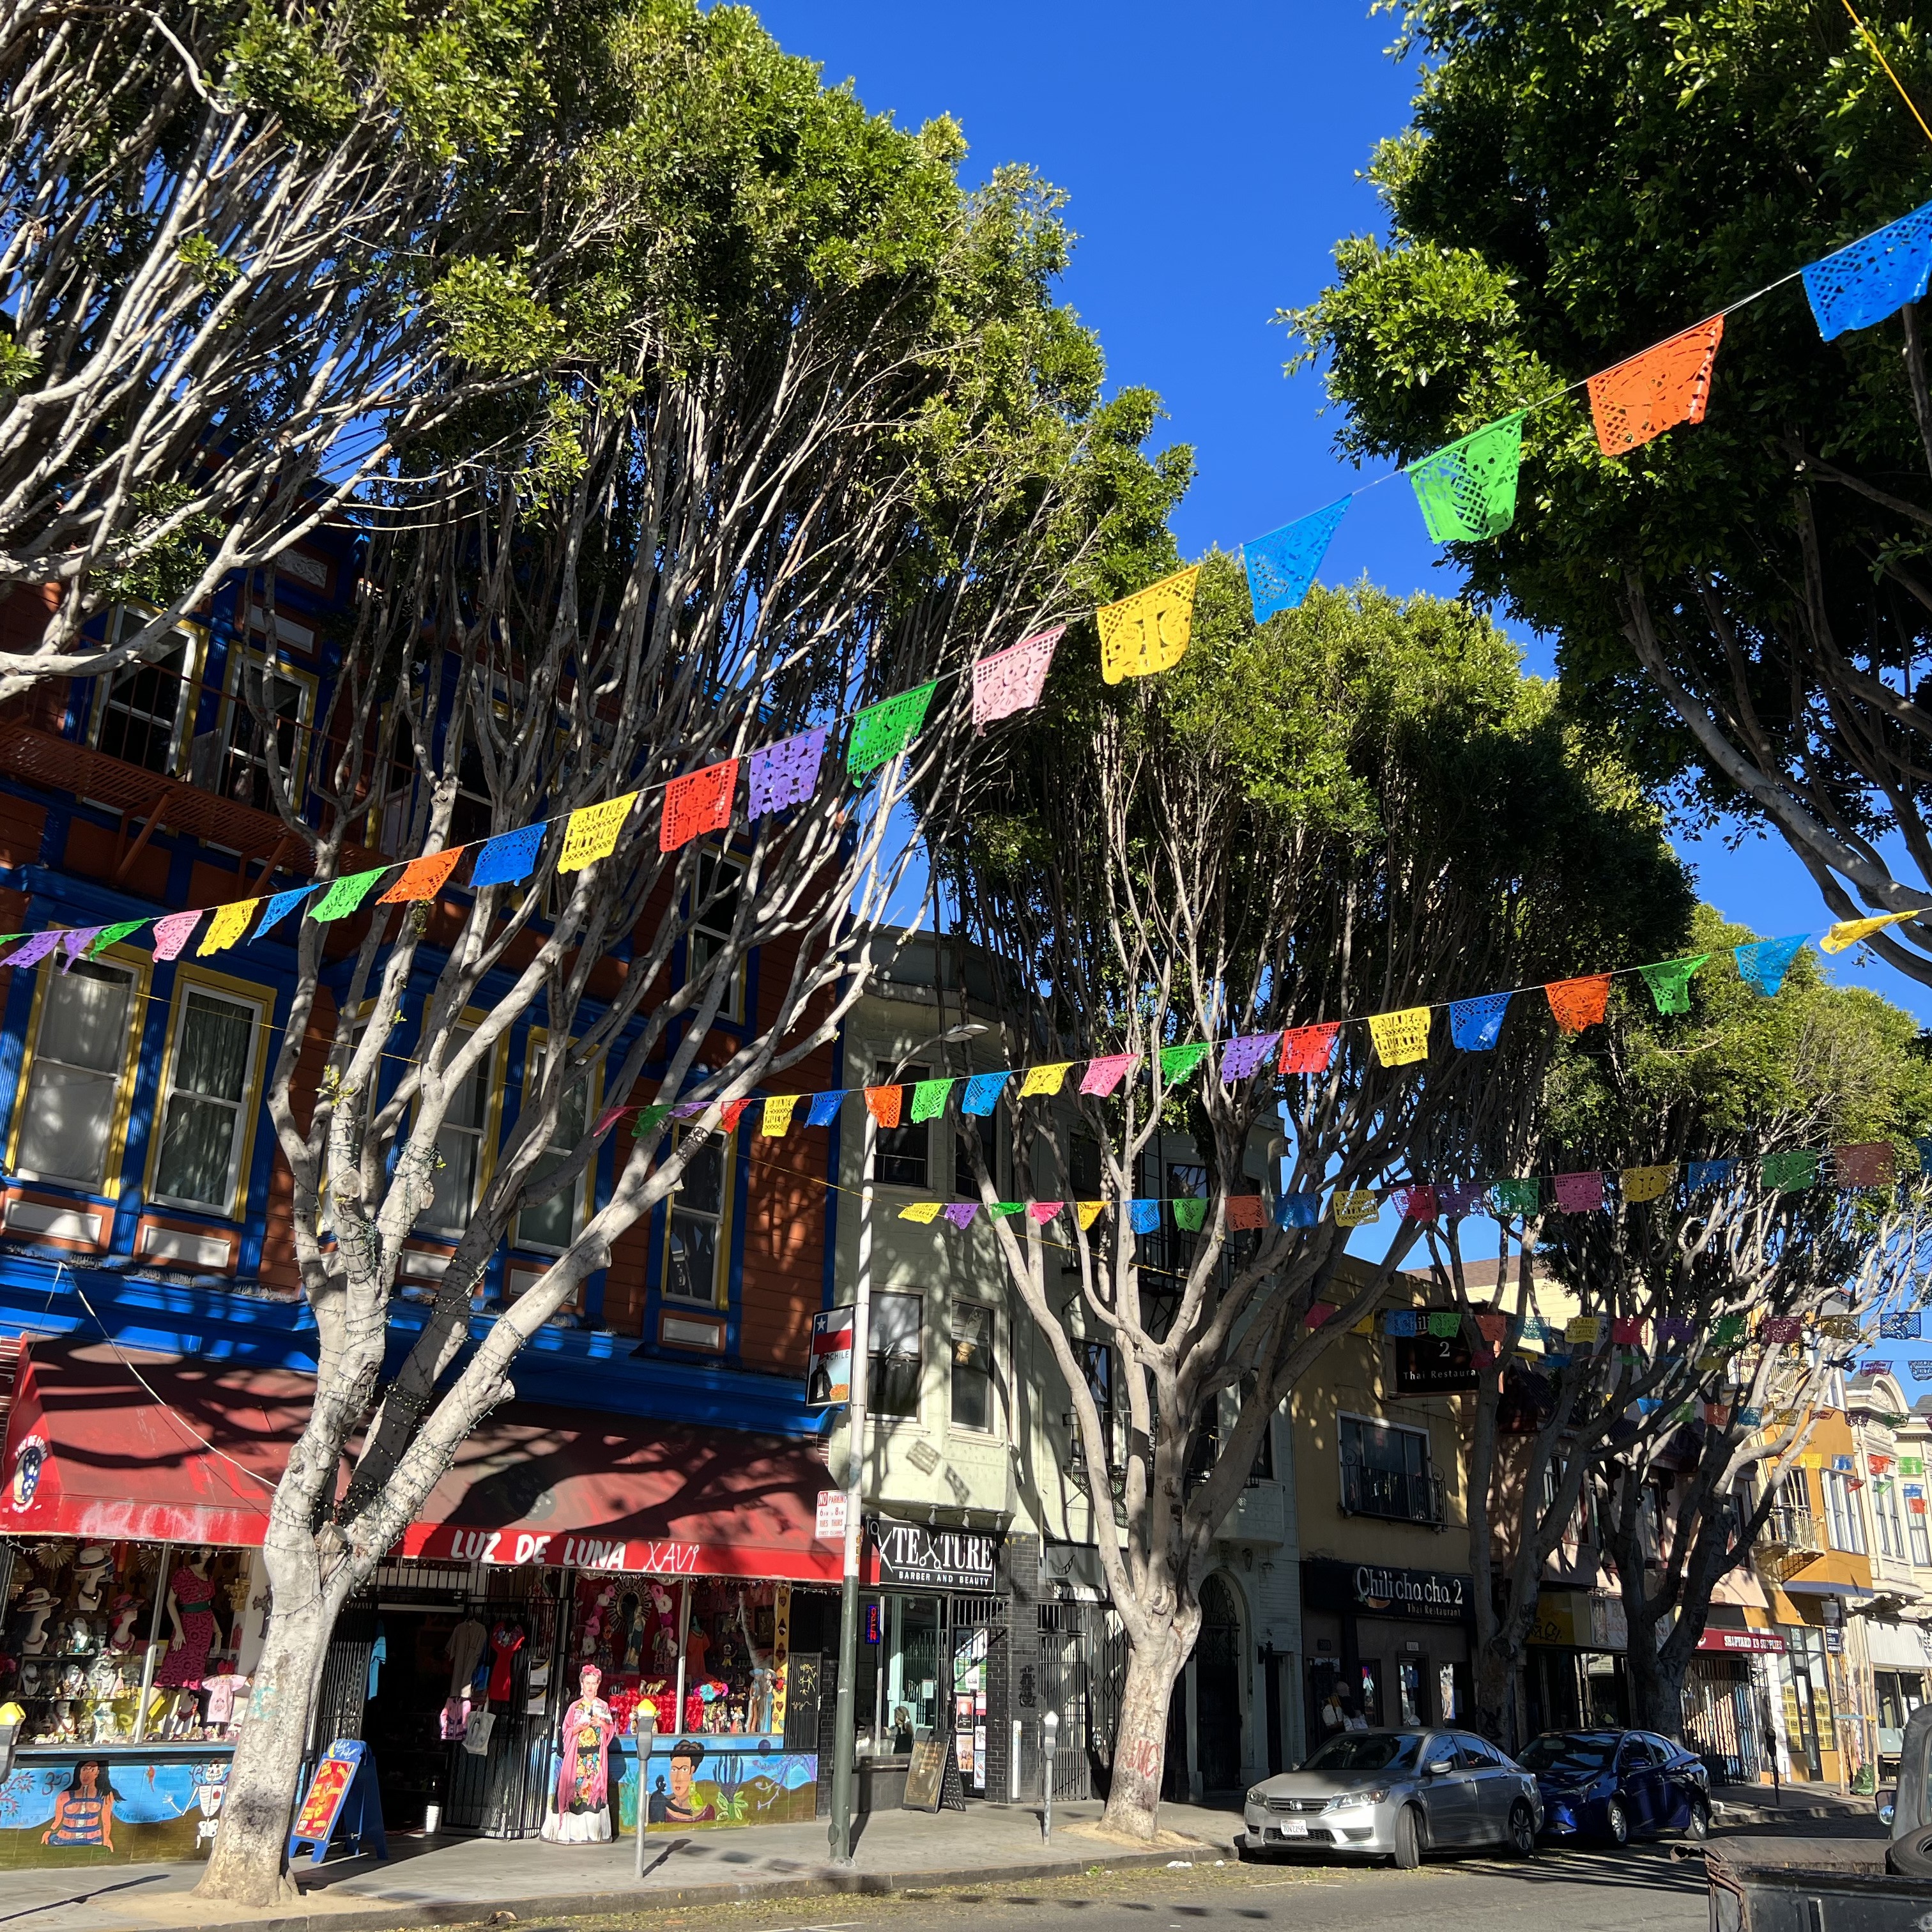 Looking down a street in the Mission with trees lining the street and multicolored flags spanning across the street.